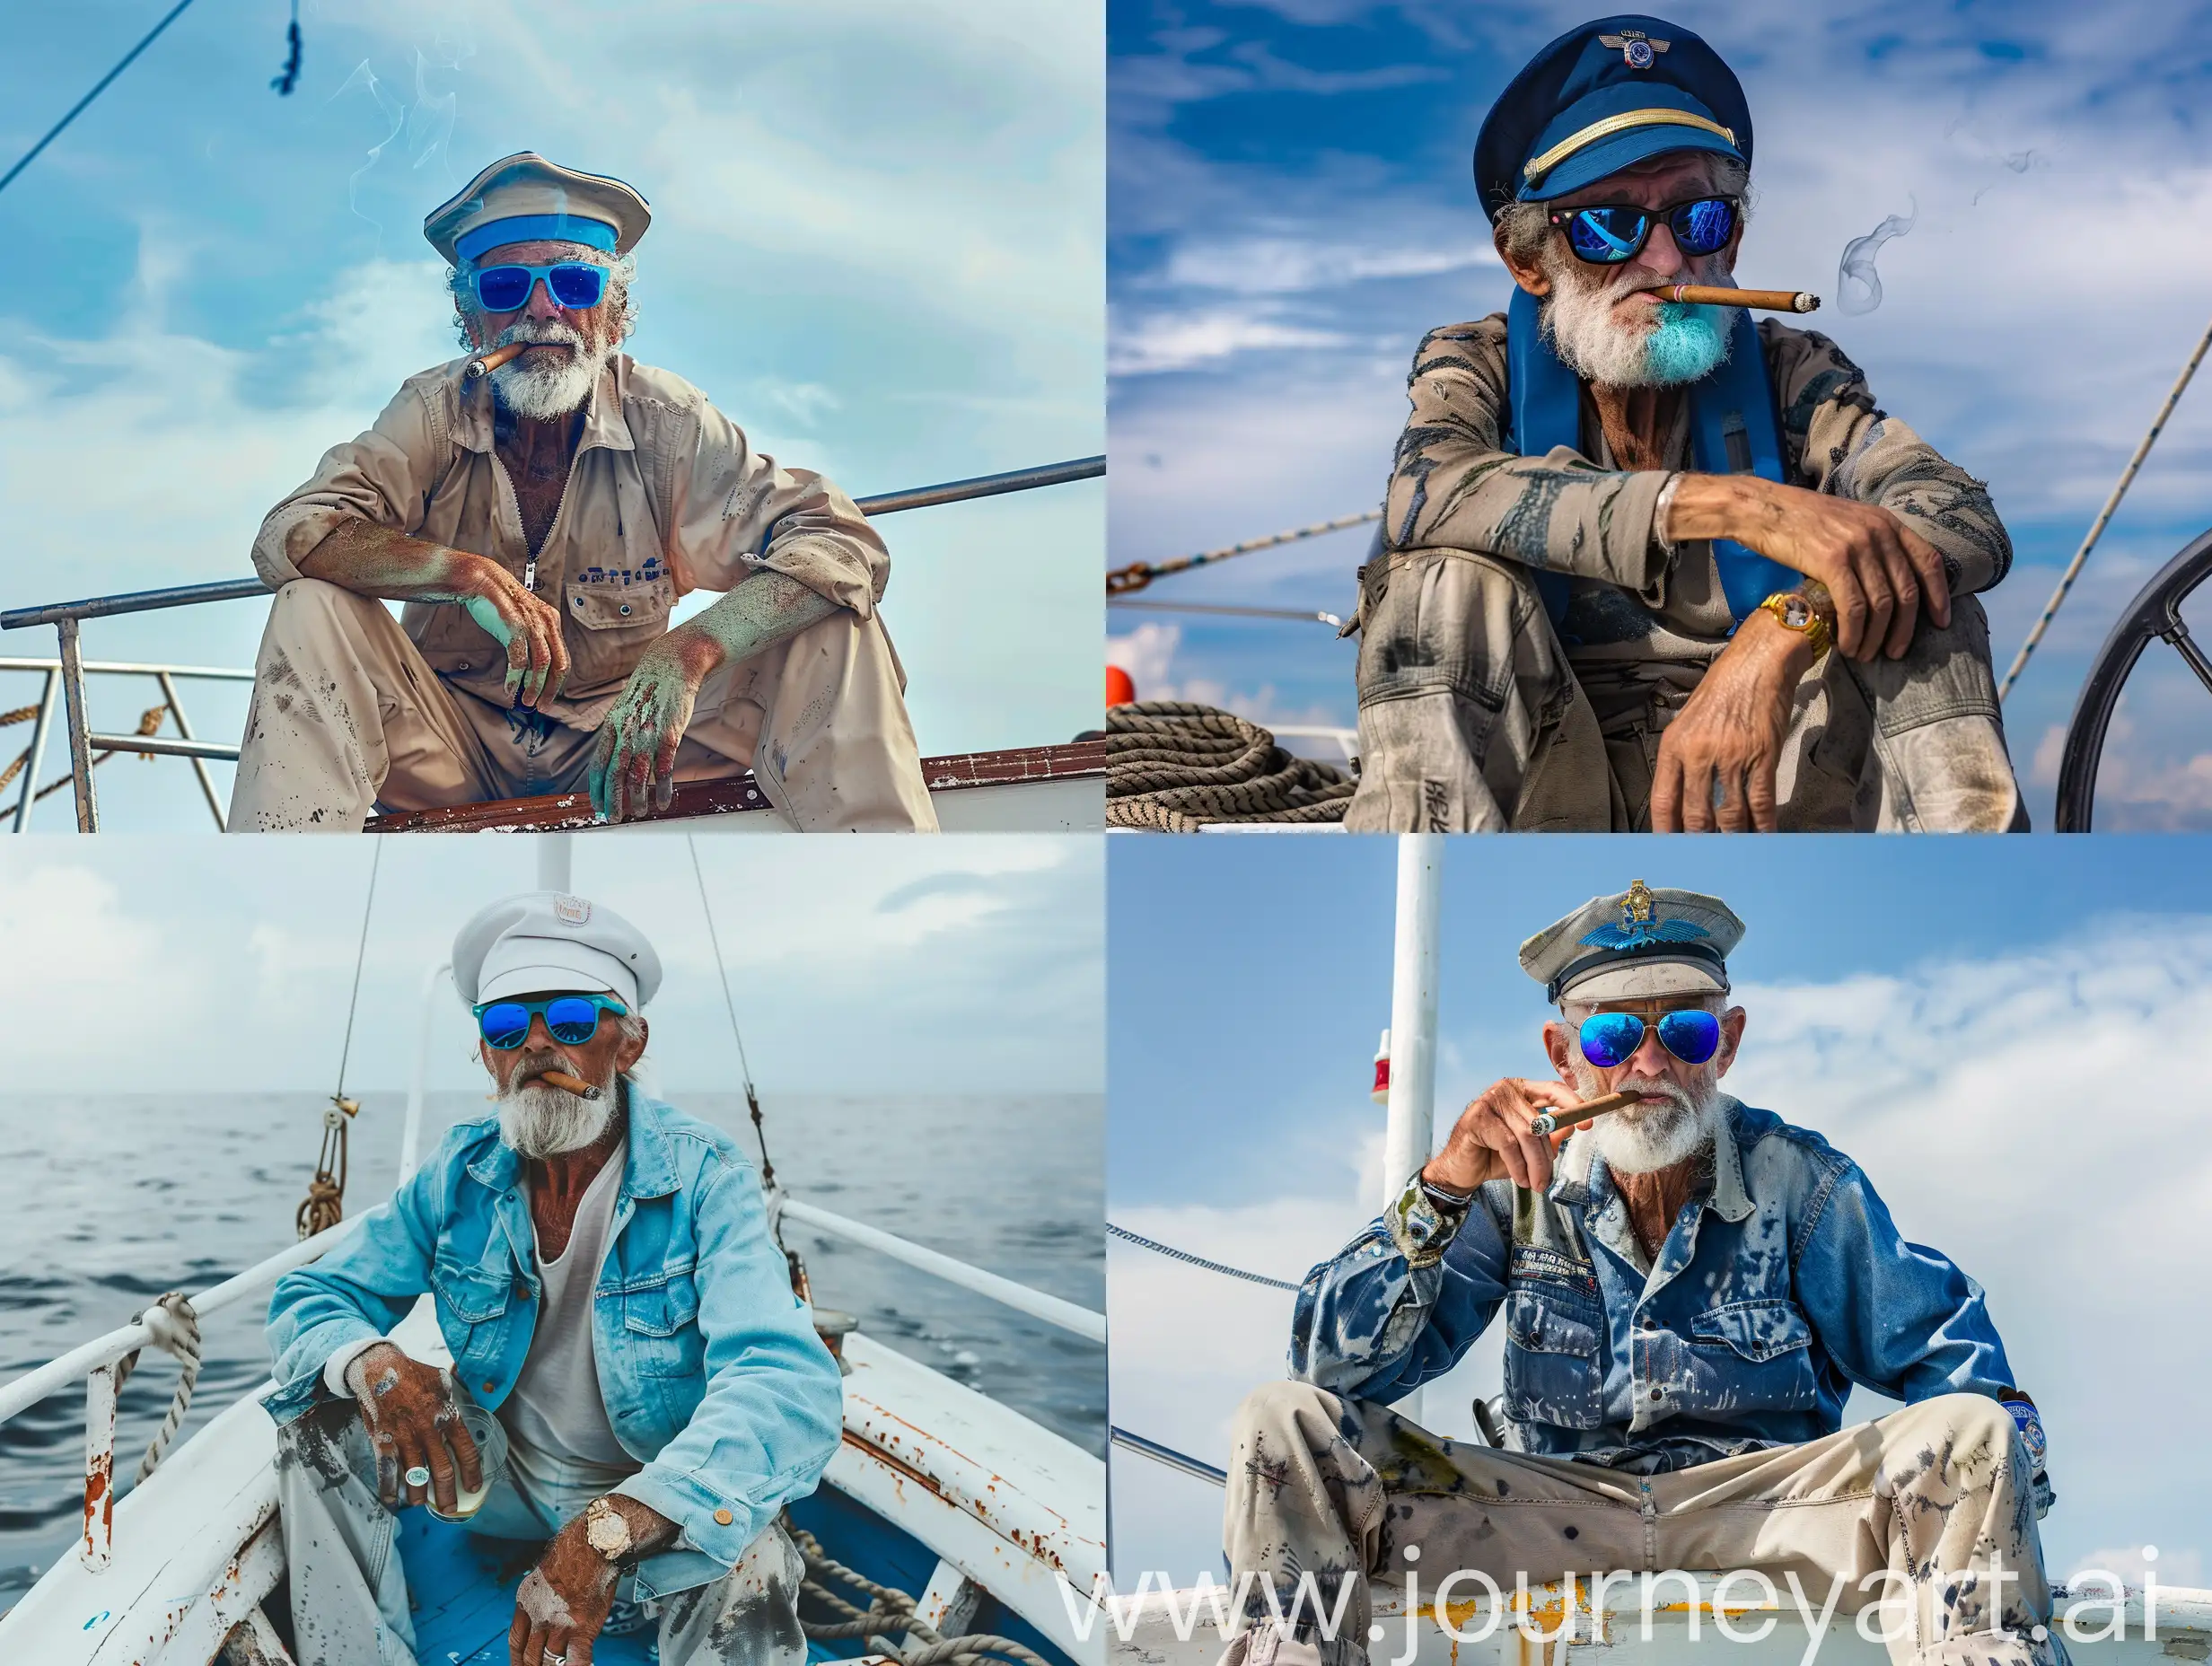 A drunk old oceanographer sits on the bow of vessel with cigare in the mouth, wearing blue sunglasses and marine captain hat
